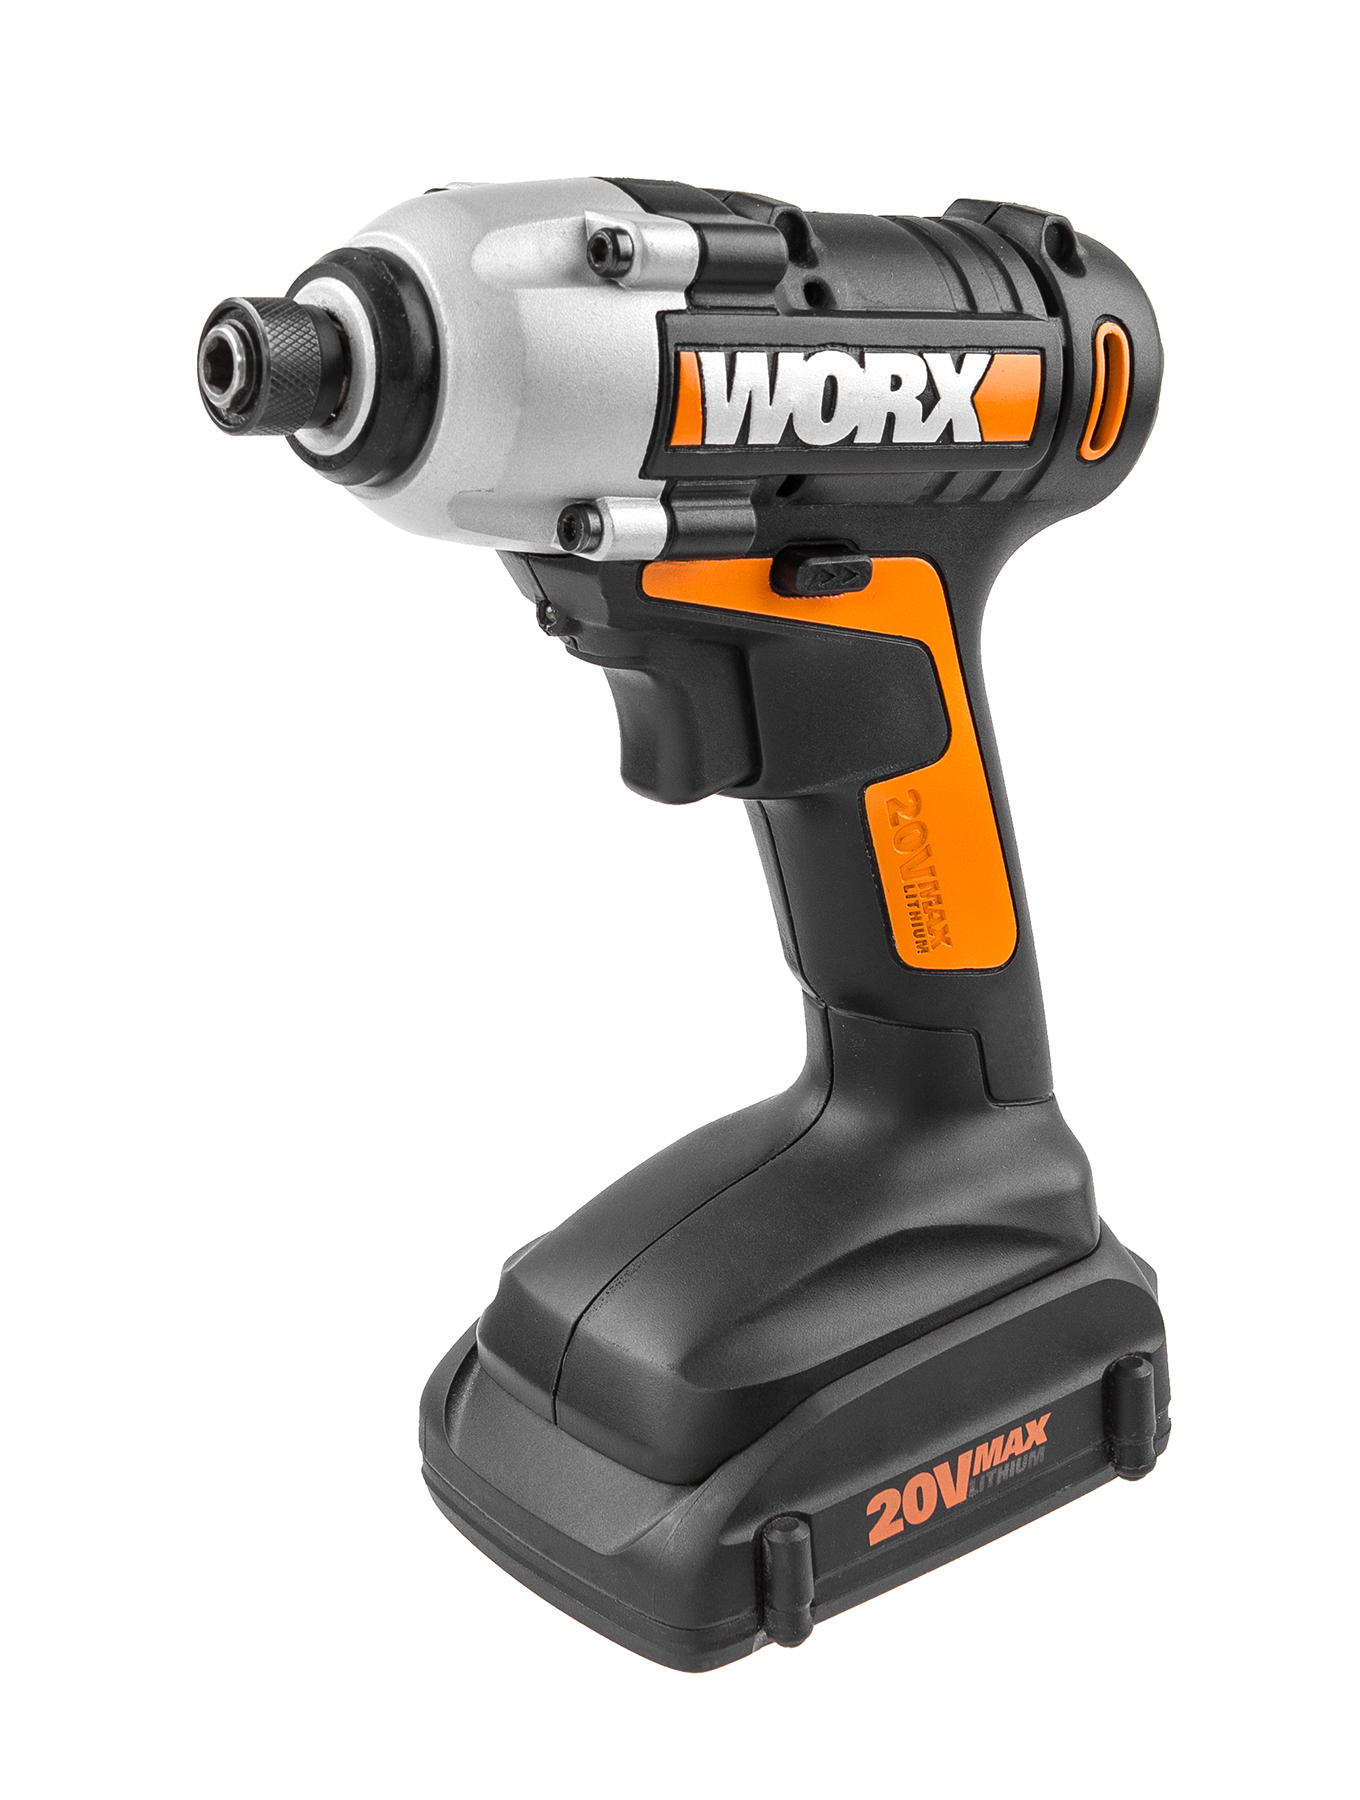 WORX® 20V Impact Driver delivers 950 in.-lbs. of torque.